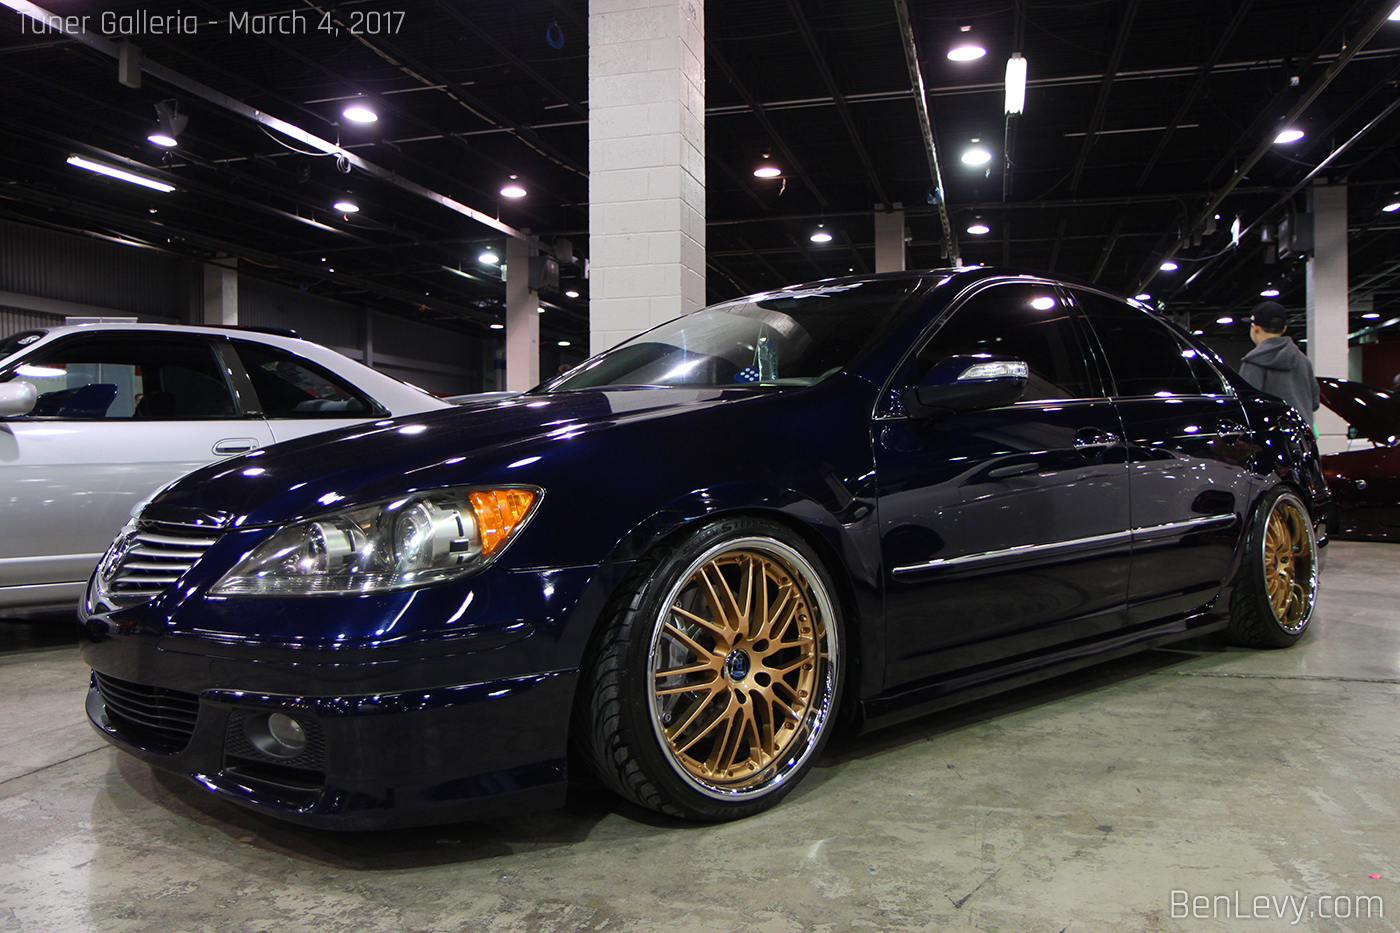 Blue Acura RL with Uprise